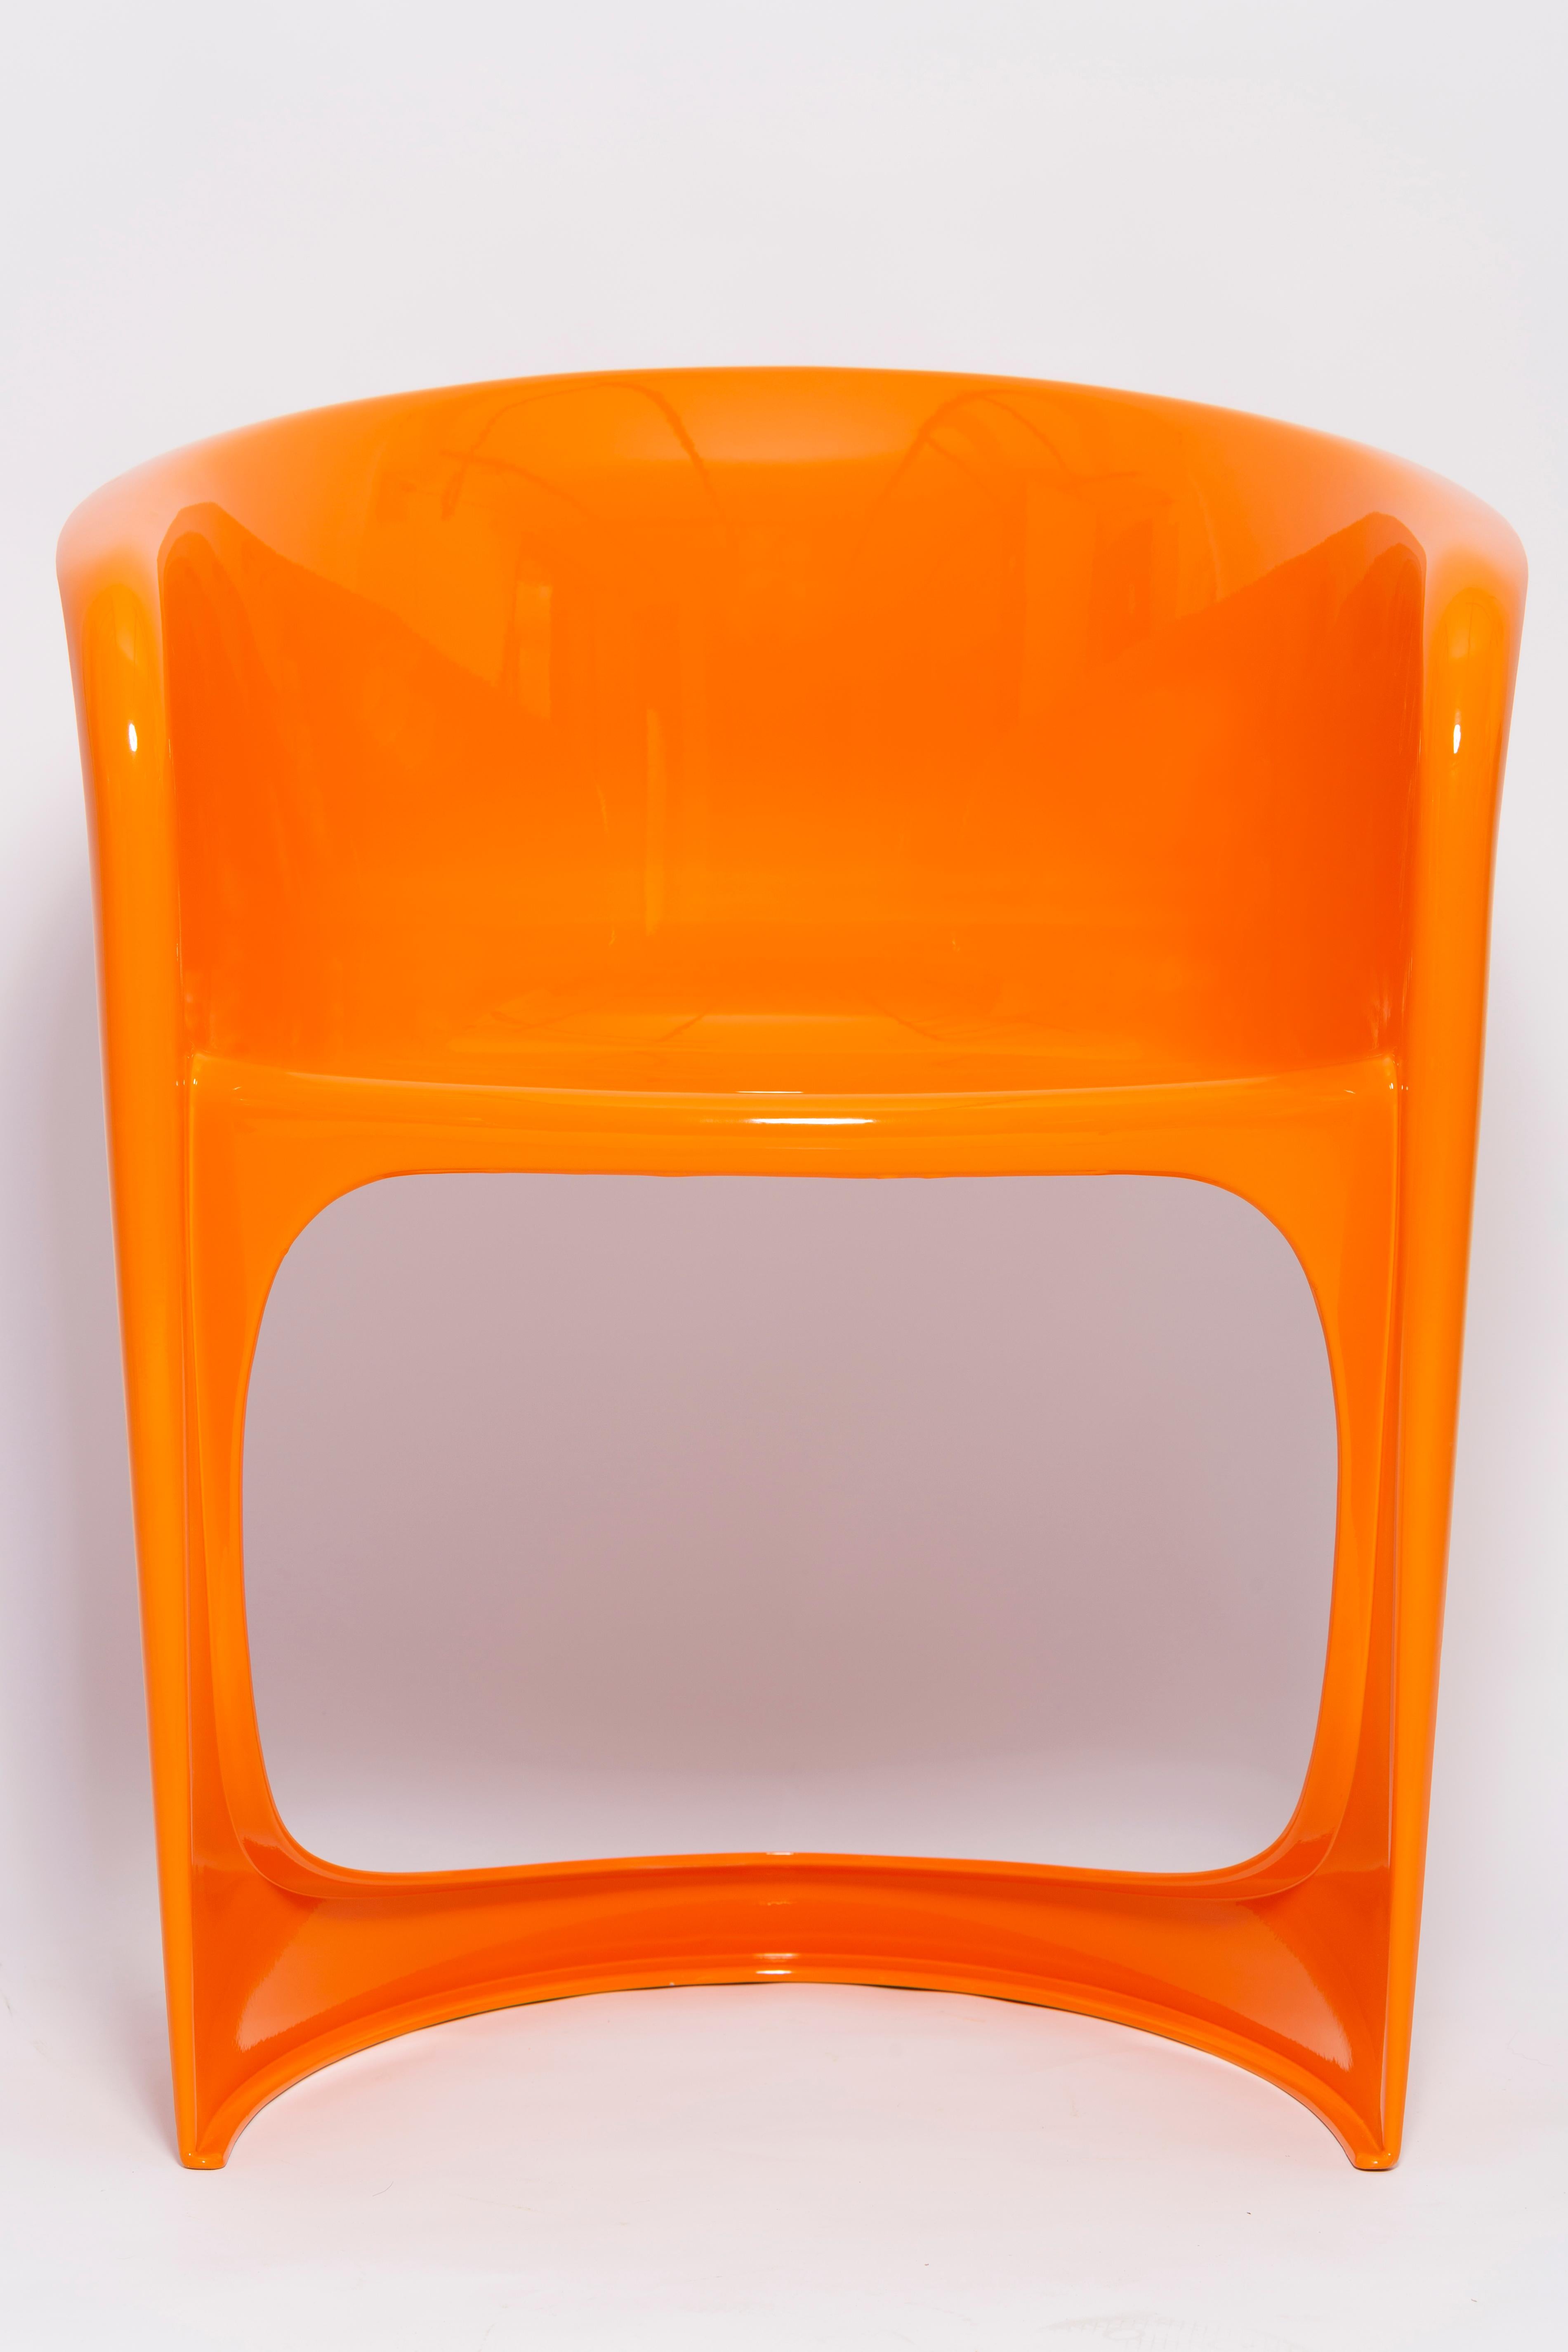 Hand-Painted Set of Six Glossy Orange Cado Chairs, Steen Østergaard, 1974 For Sale